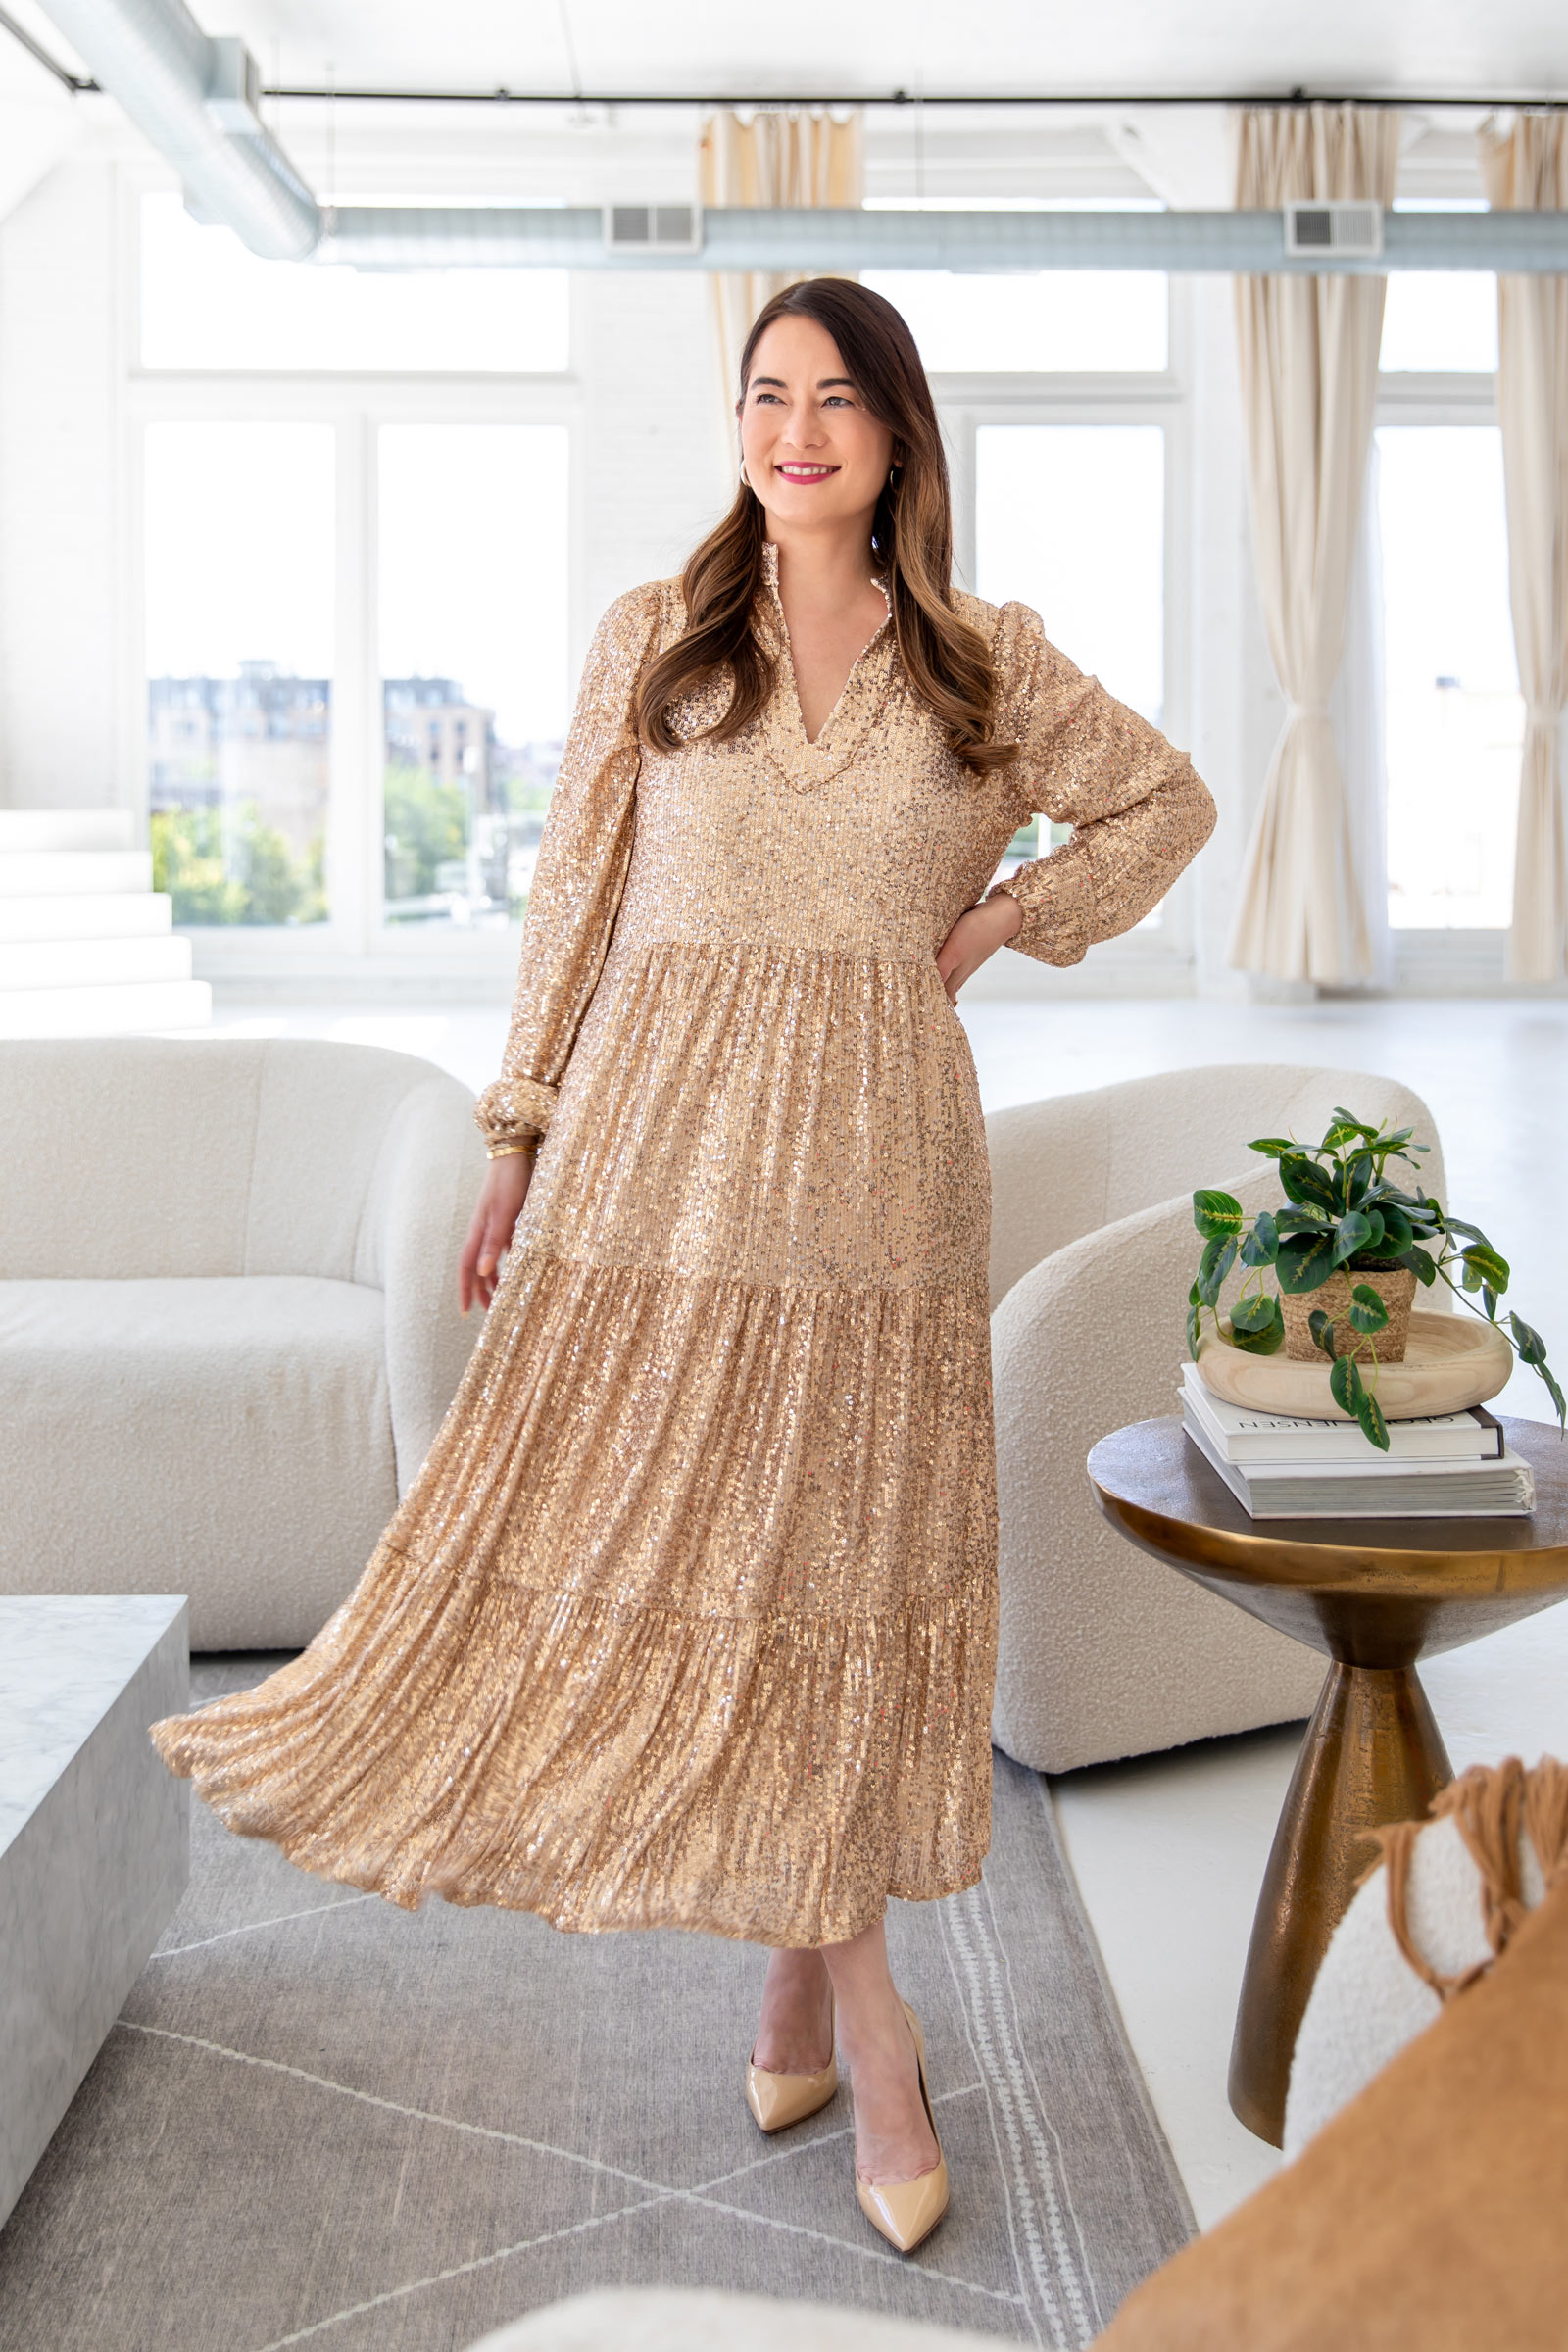 Sail to Sable Style Charade Anne Sequin Dress Gold